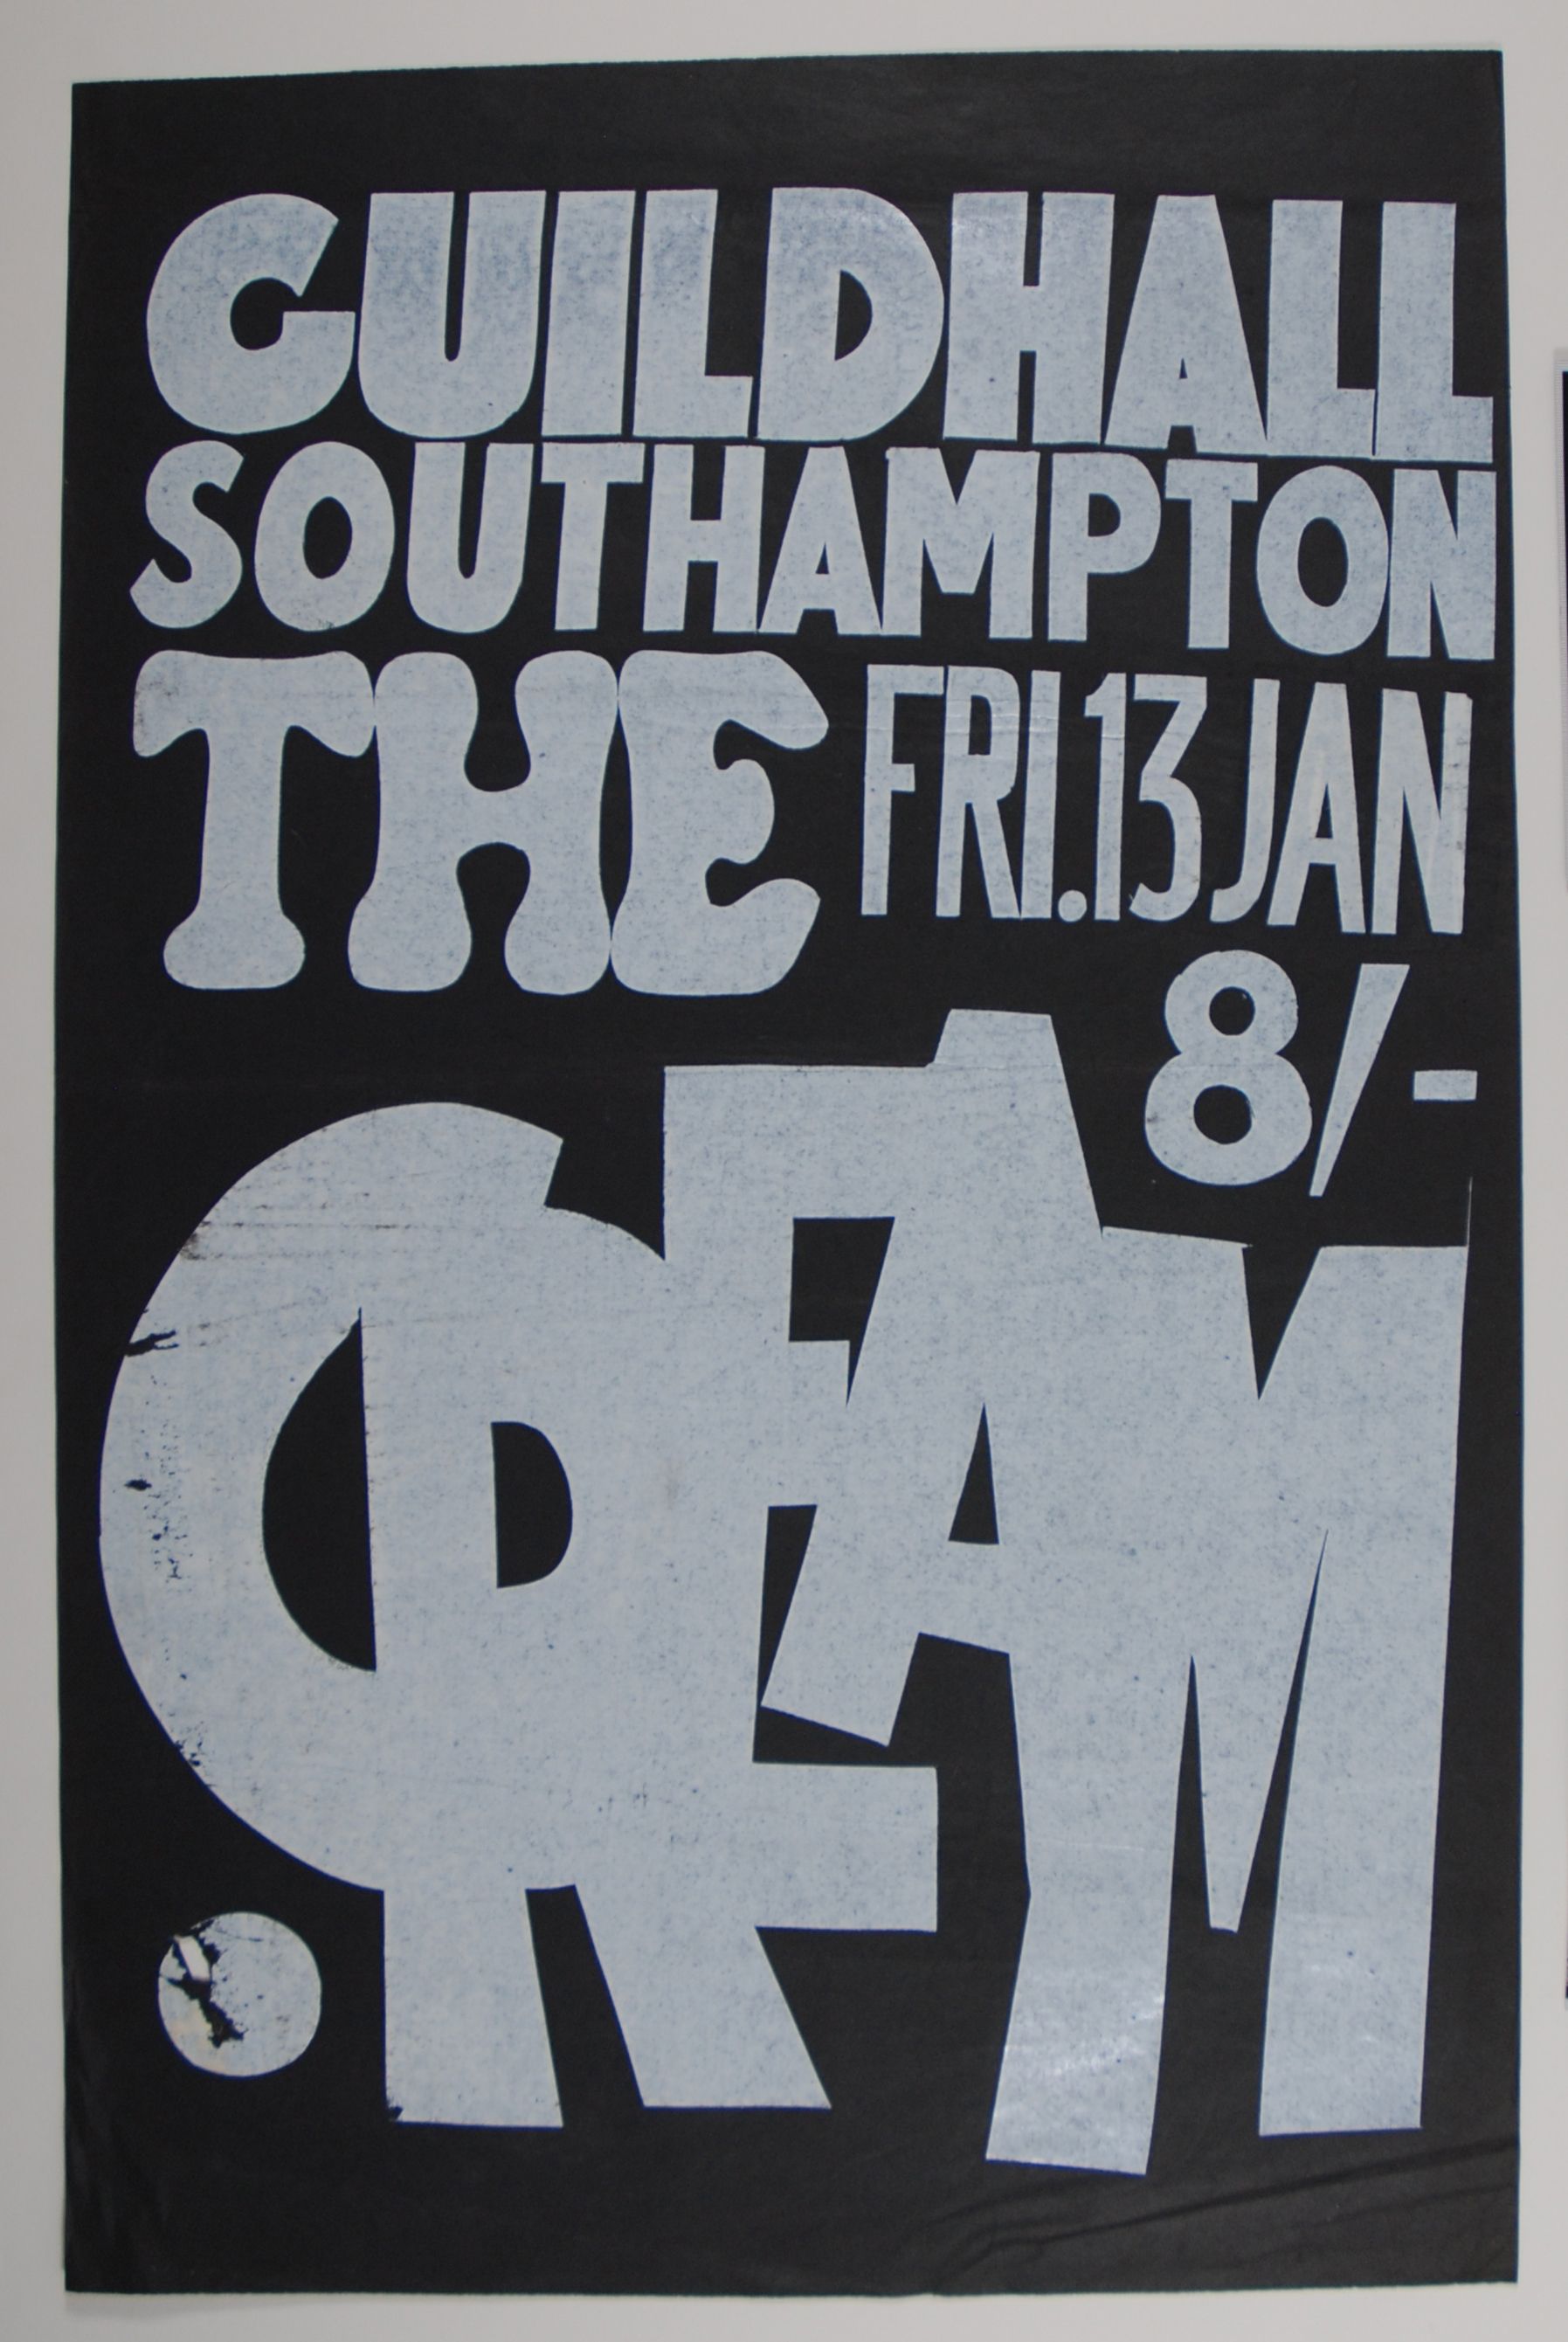 Cream at Guidhall 1967 Concert Poster